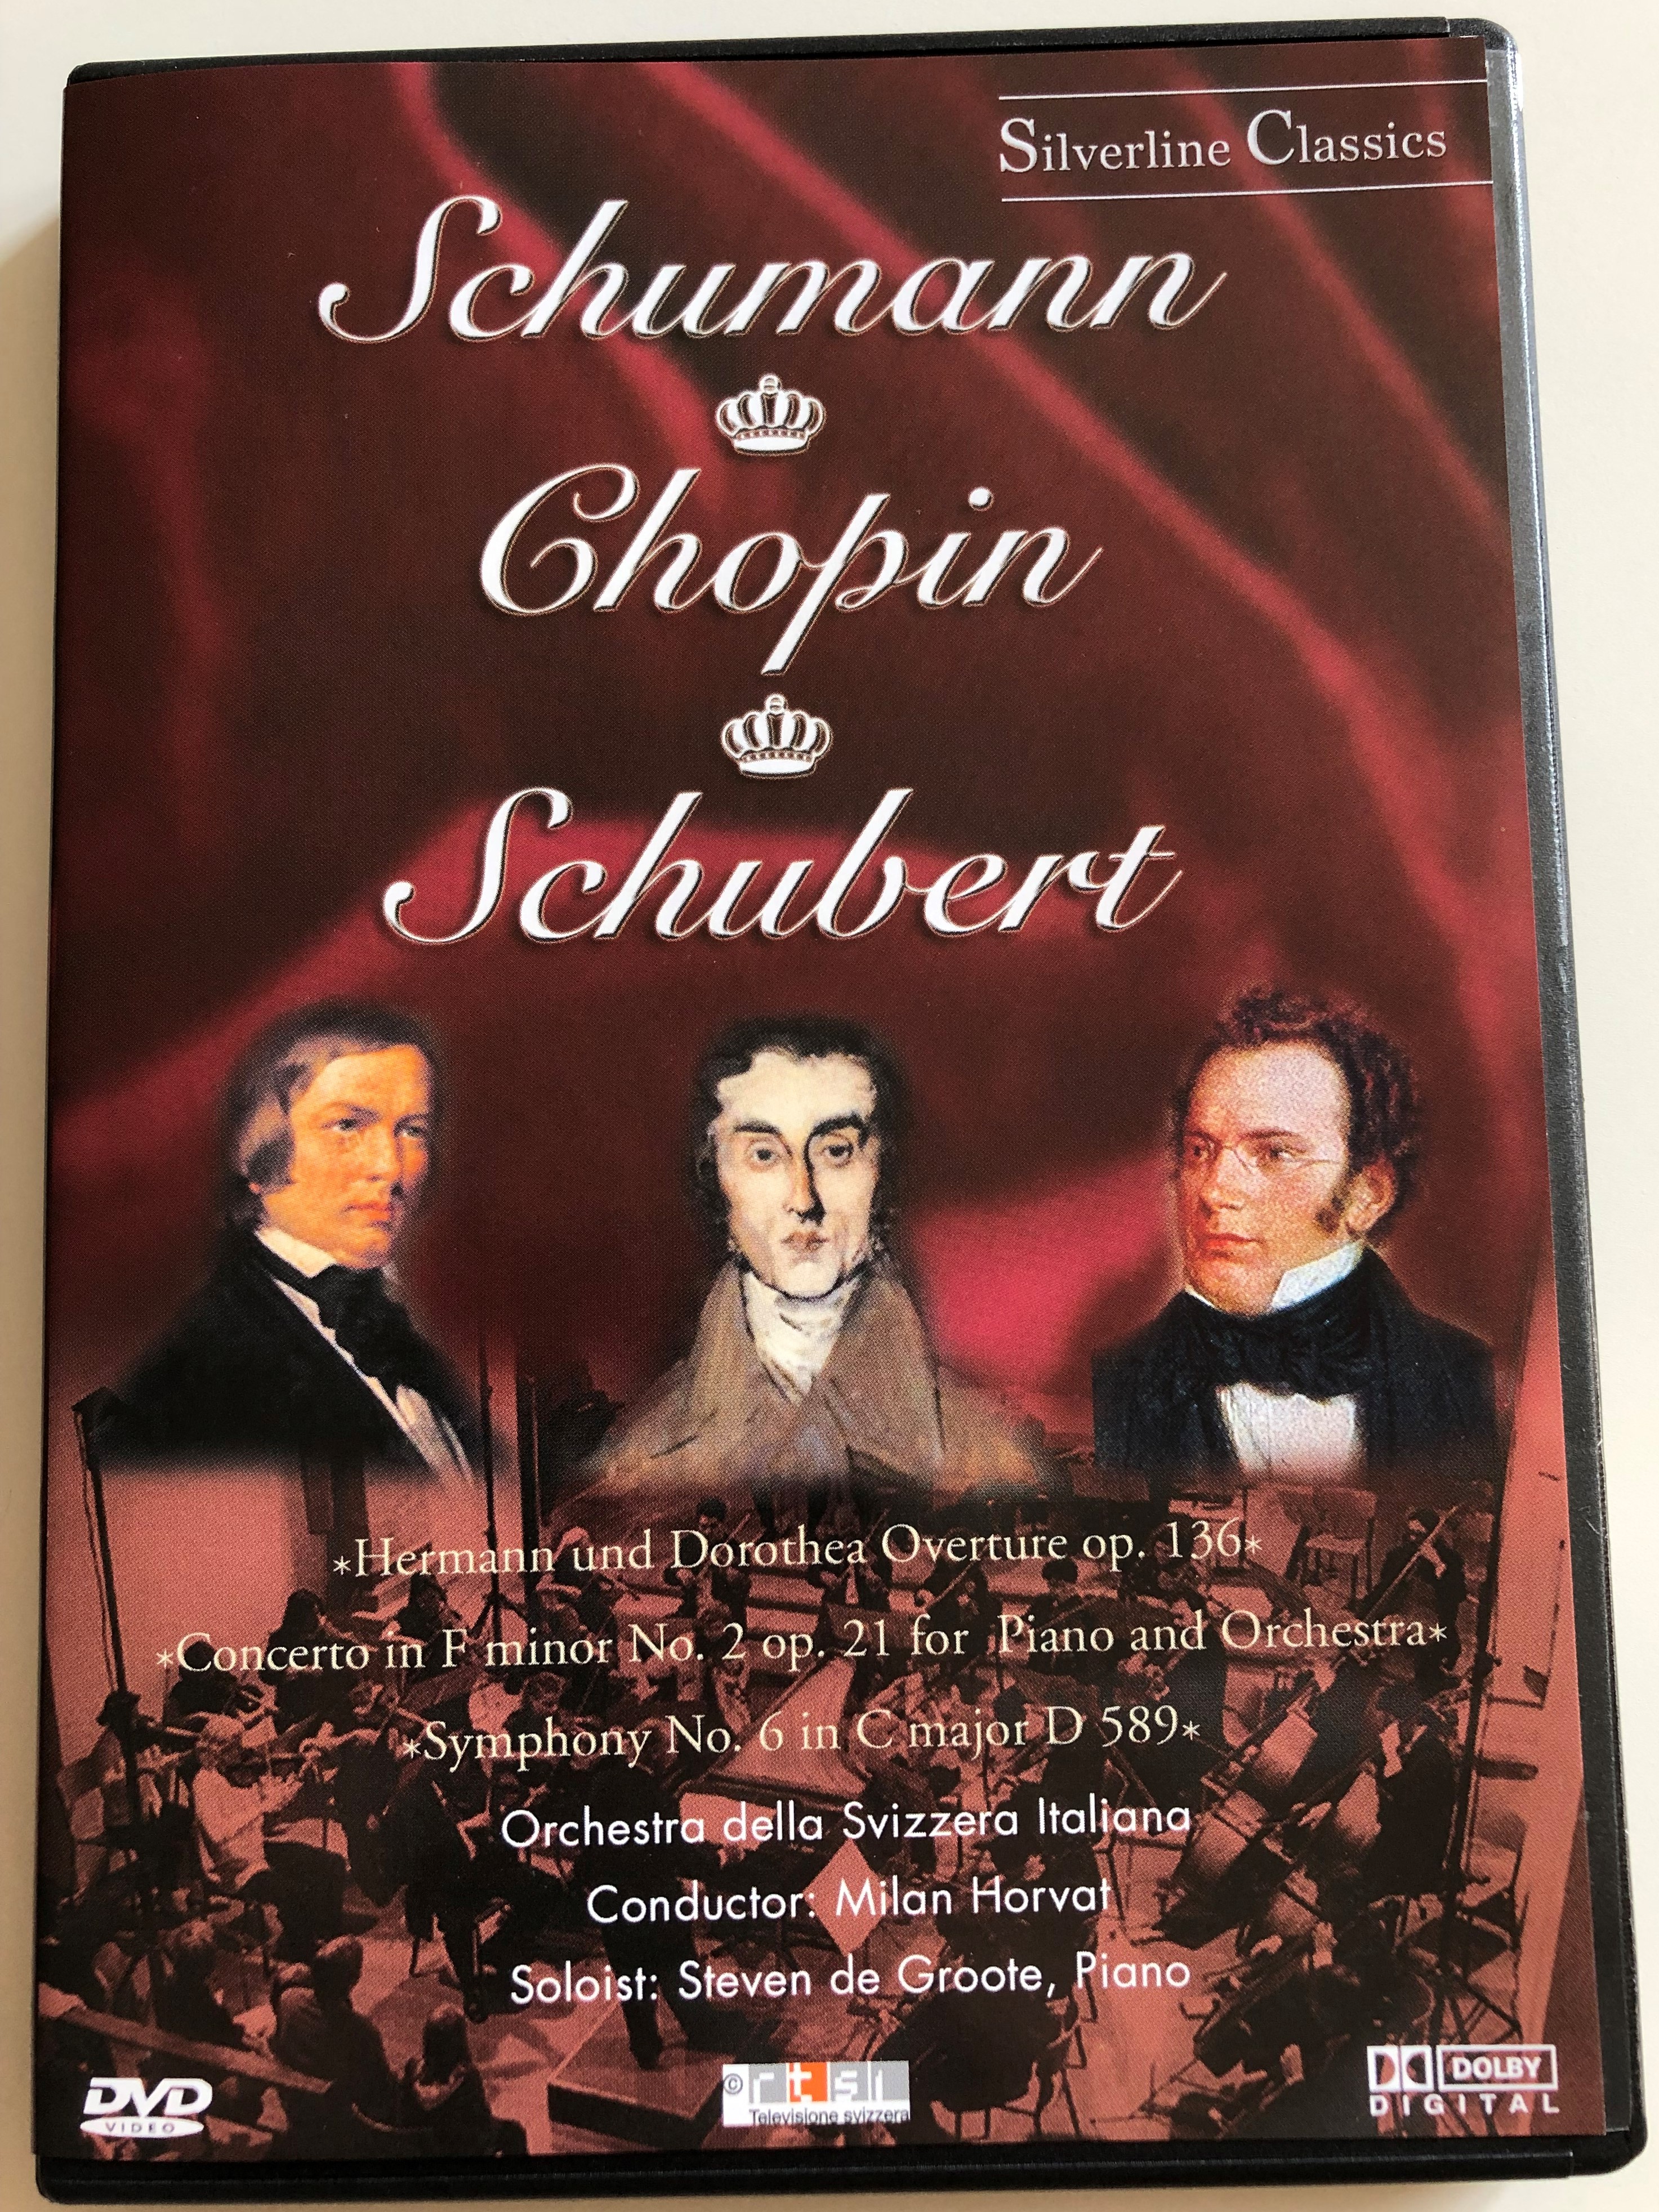 schumann-chopin-schubert-dvd-1983-hermann-und-dorothea-overture-op.-136-concerto-in-f-minor-no.-2-op.-21-piano-and-orchestra-orchestra-della-svizzera-italiana-conducted-by-milan-horvat-soloist-steven-de-groote-piano-1-.jpg